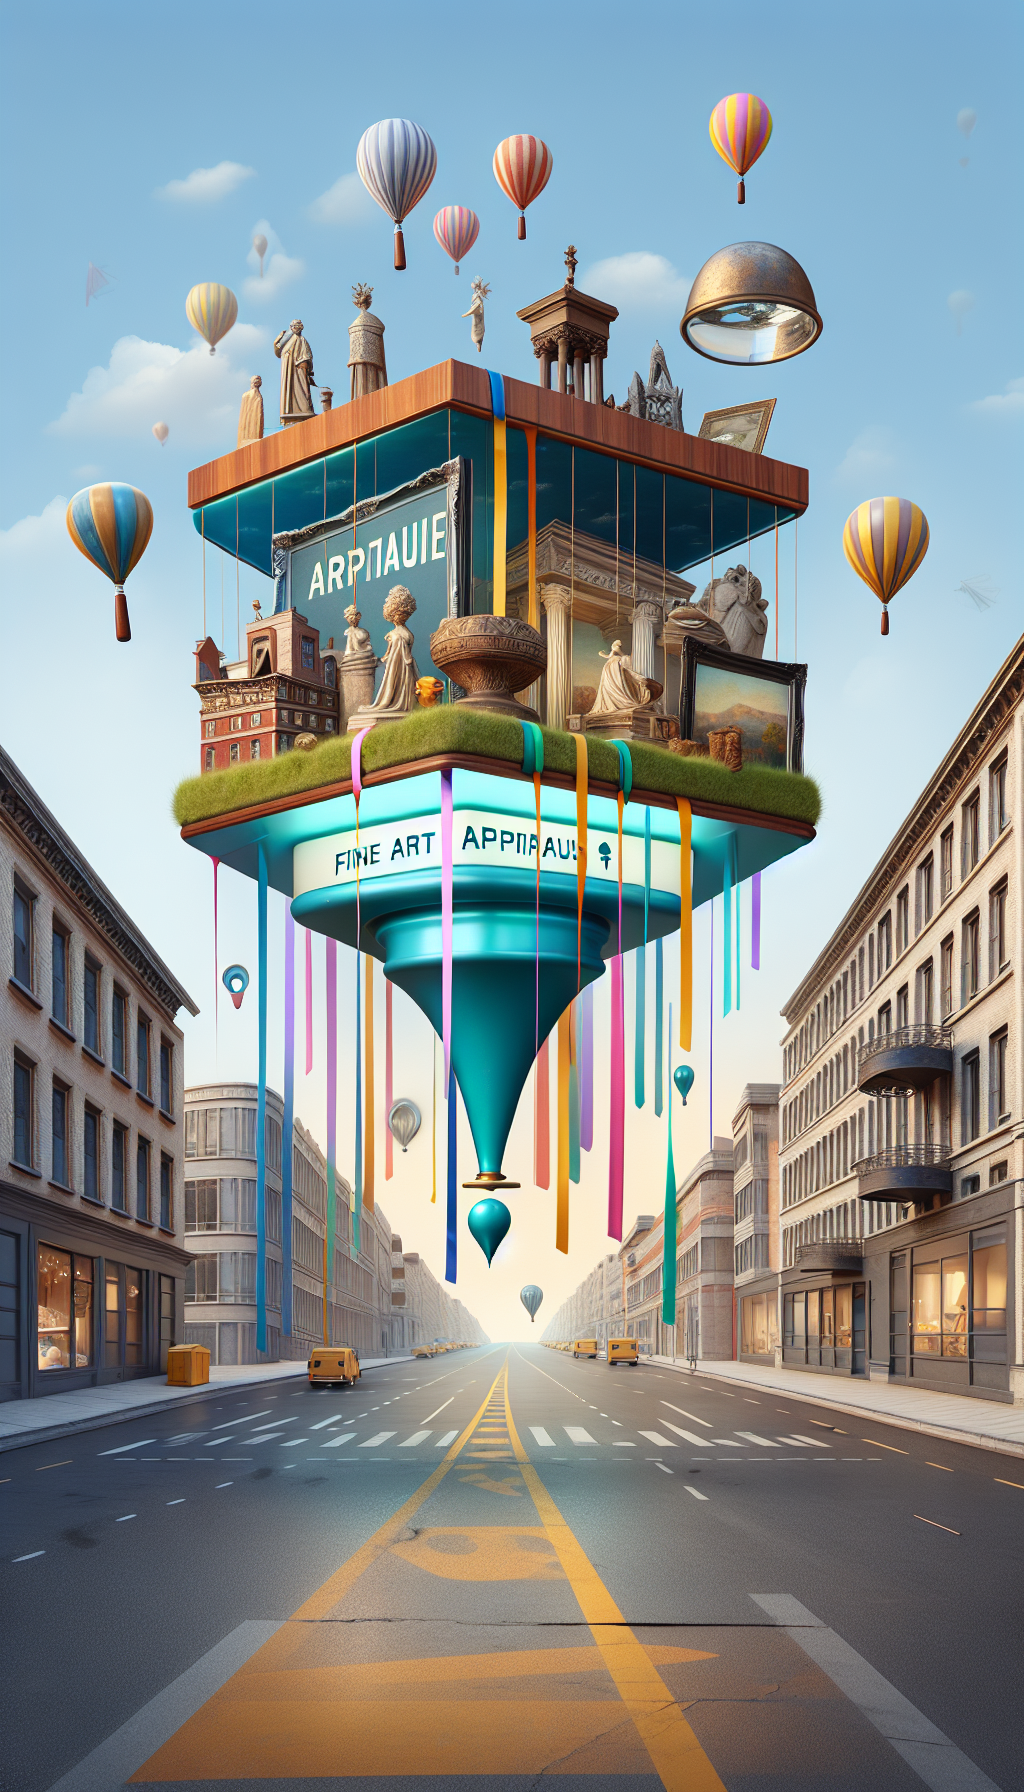 A whimsical image depicts an elevated urban corner street scene with a boutique appraisal store floating in the air, tethered by ribbons to nearby buildings. Fine art pieces like paintings and sculptures peek out of the windows, each with a glowing price tag. A magnifying glass superimposed on a map pin is visible above the store, symbolizing 'fine art appraisal near me'.